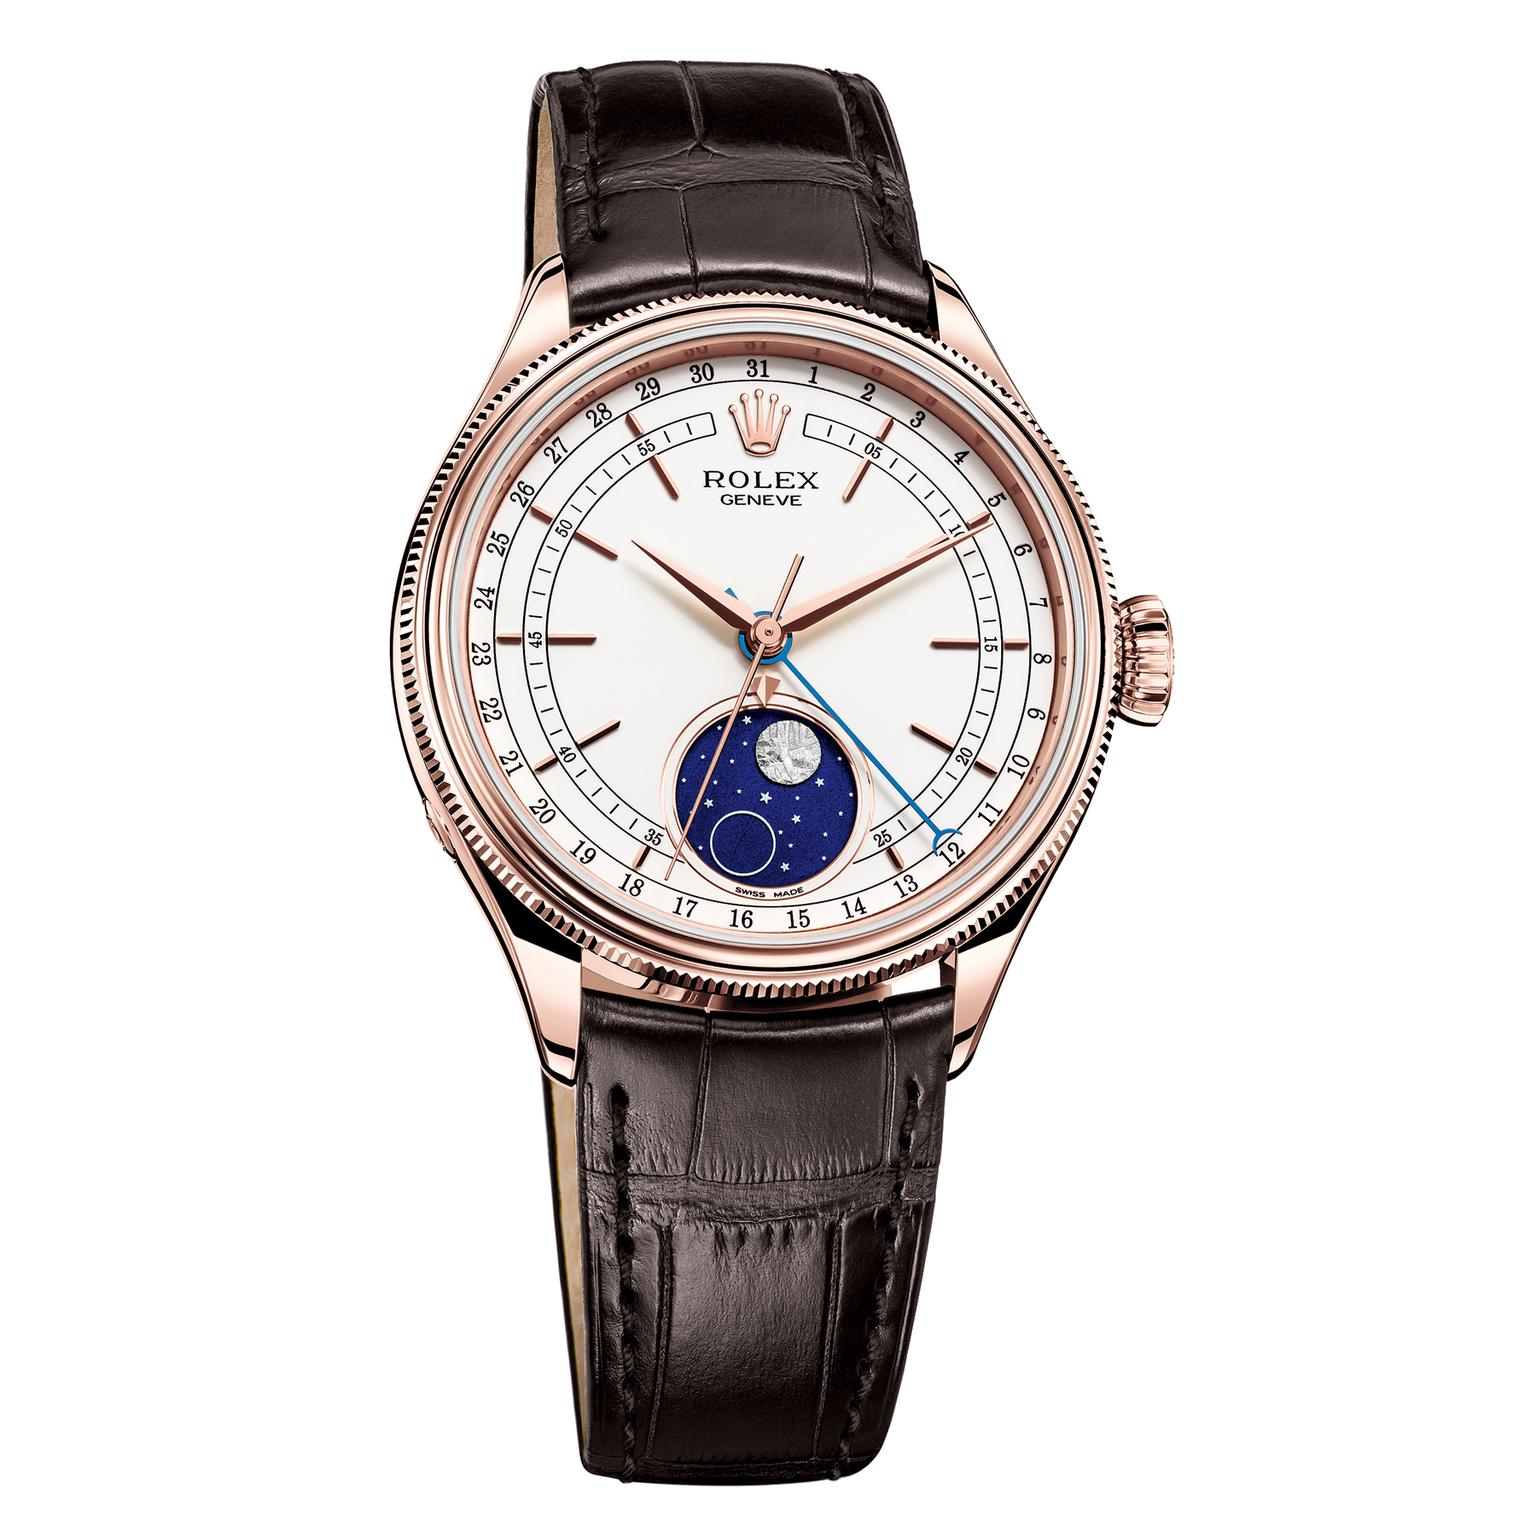 Rolex Cellini Moonphase watch in Everose gold